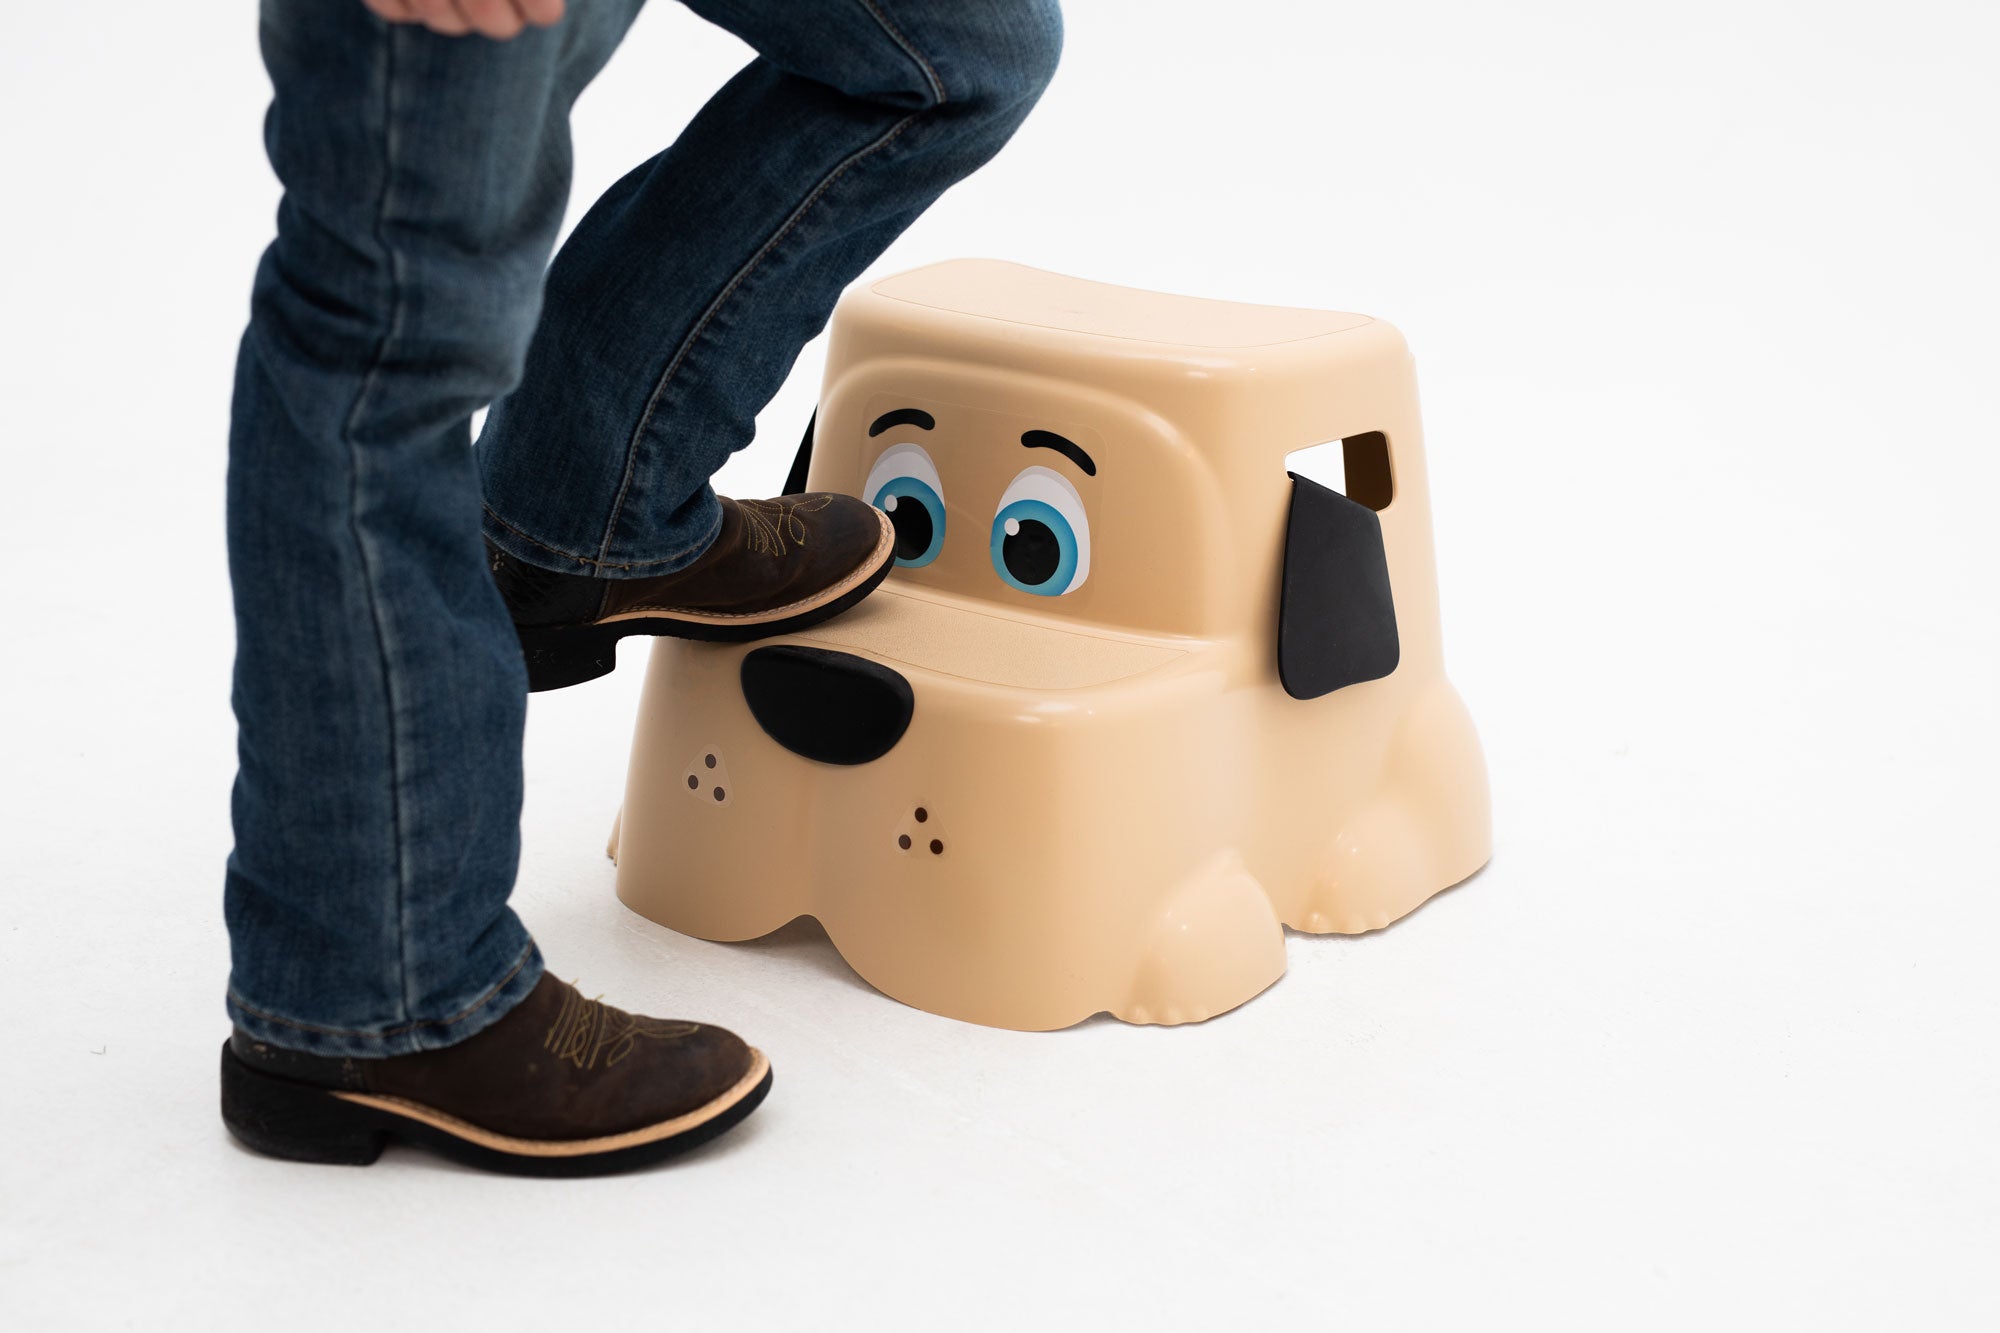 Potty Pet's dog can be used as a step stool